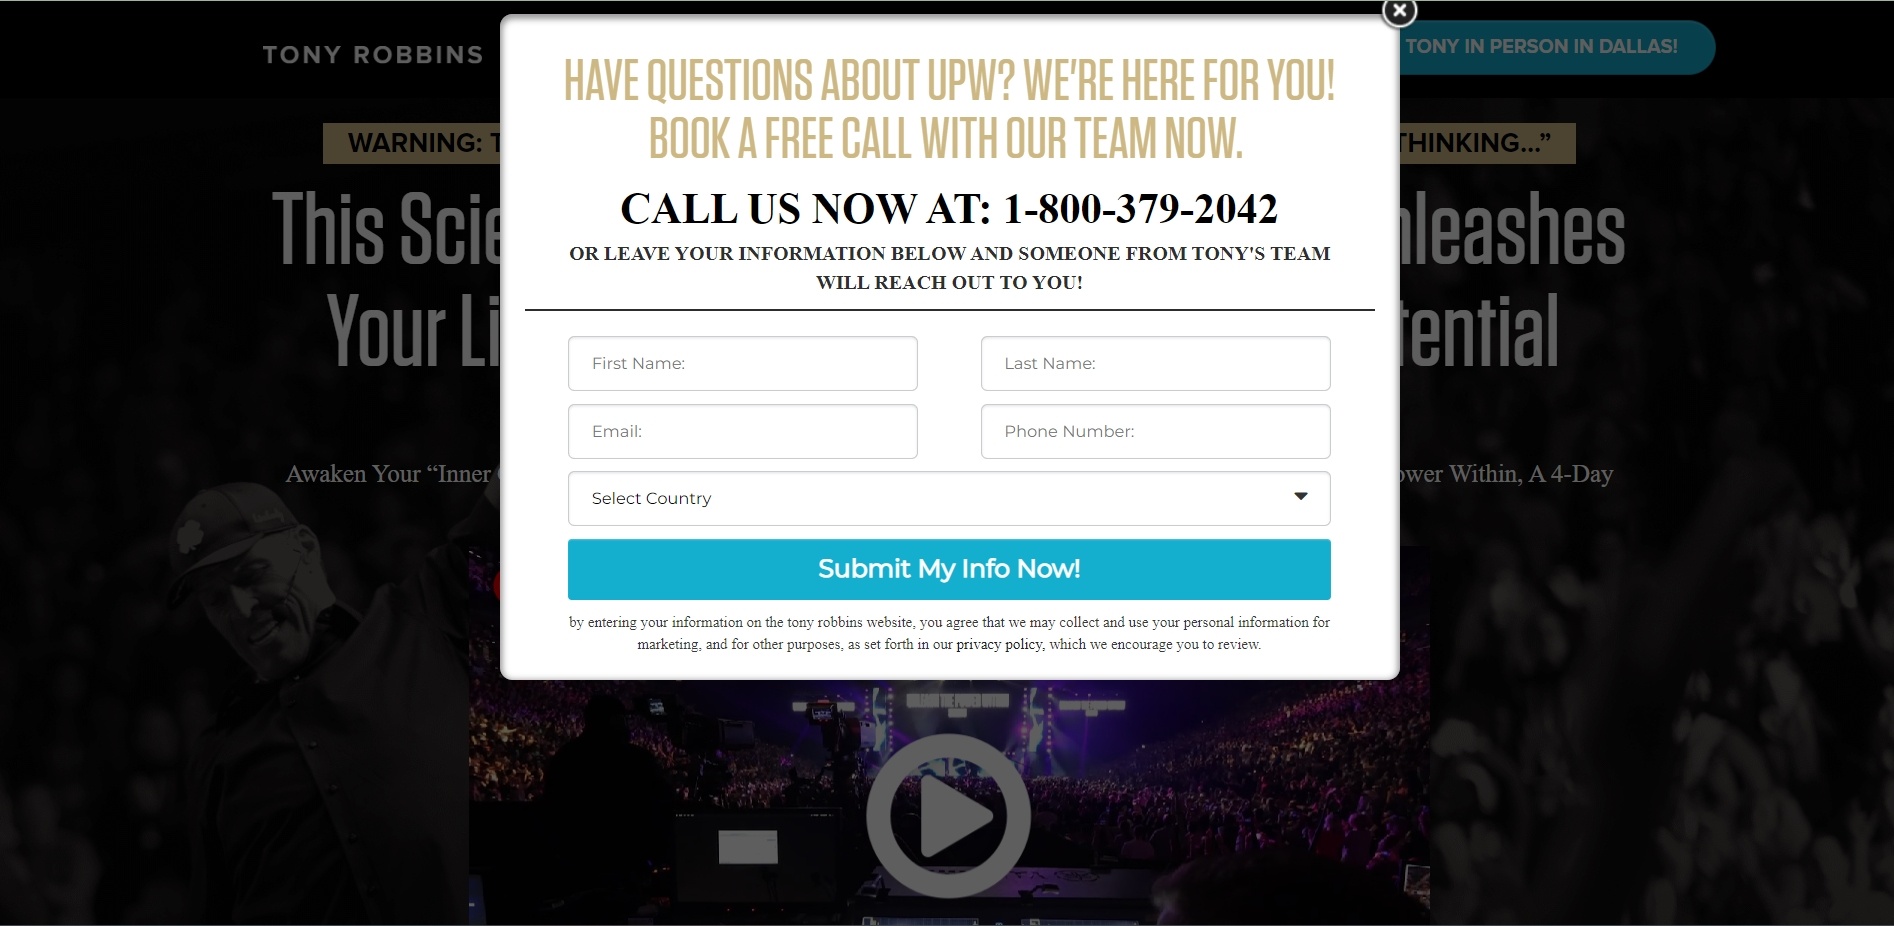 Tony Robbins email sign up for their Unleash The Power Within program